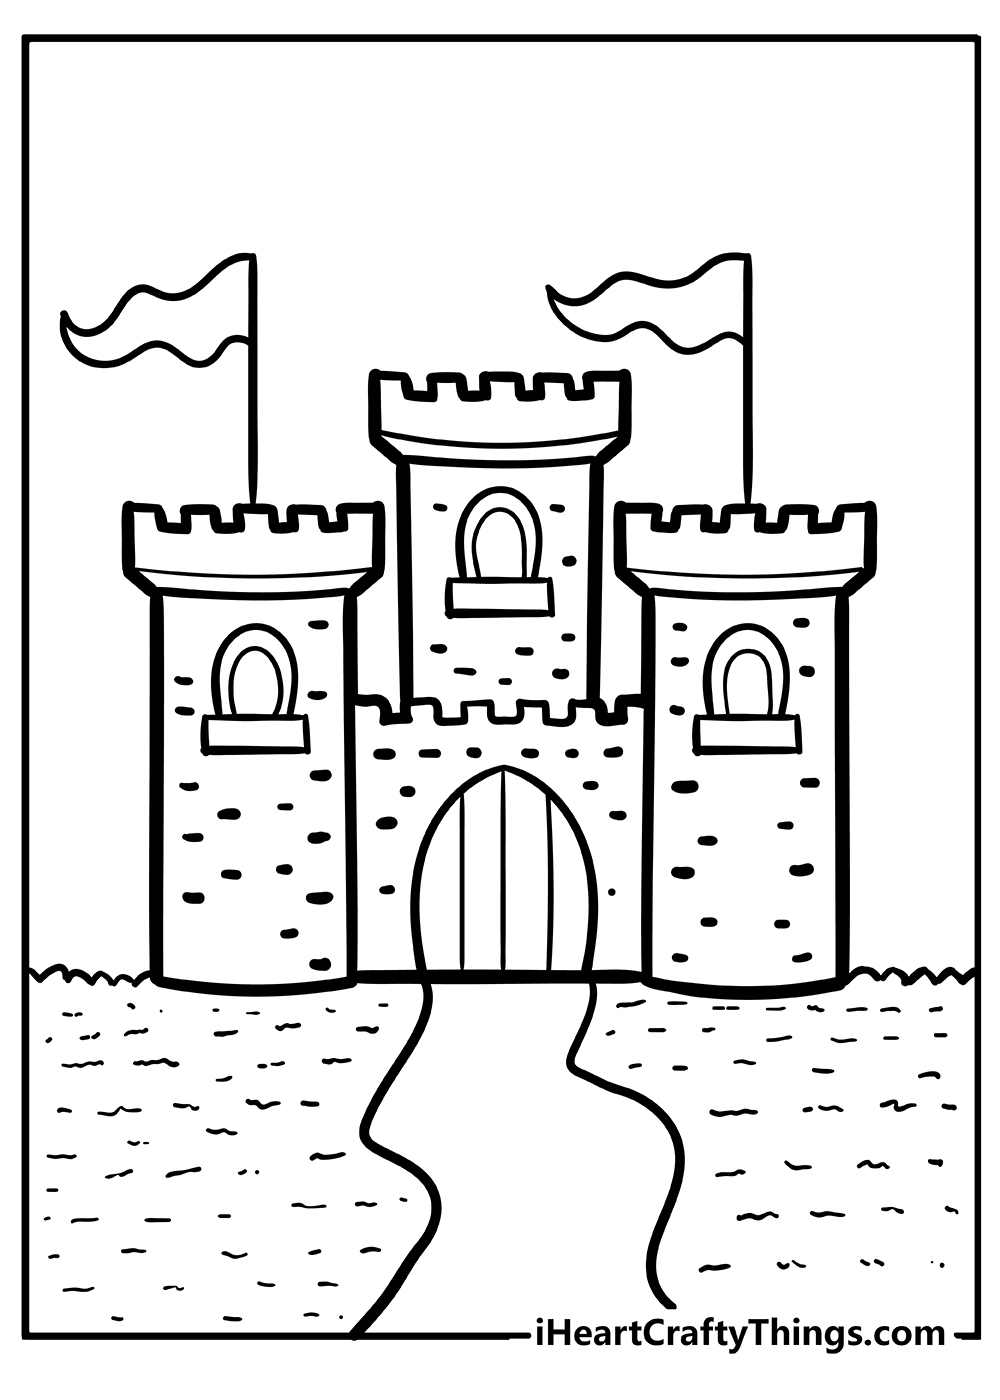 Castle Coloring Book for adults free download